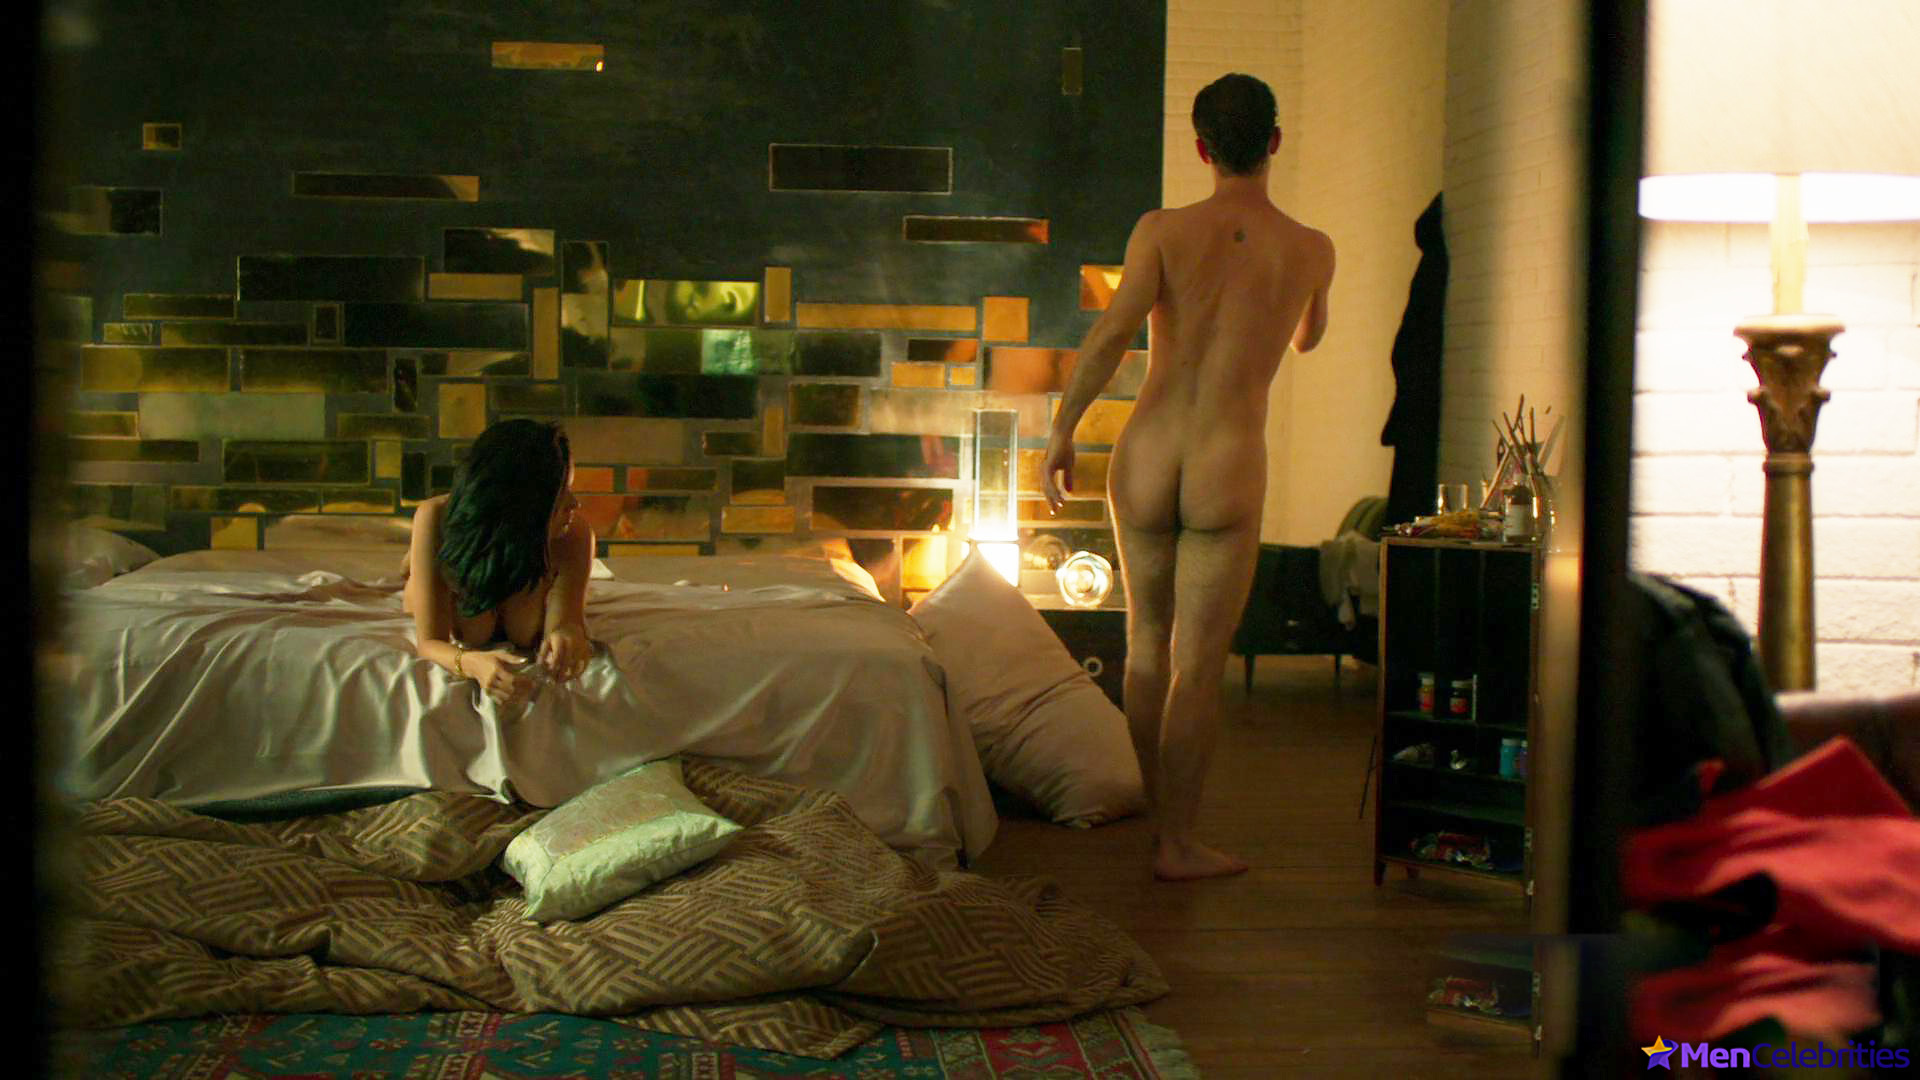 Pedro Alonso nude and gay movie scenes.